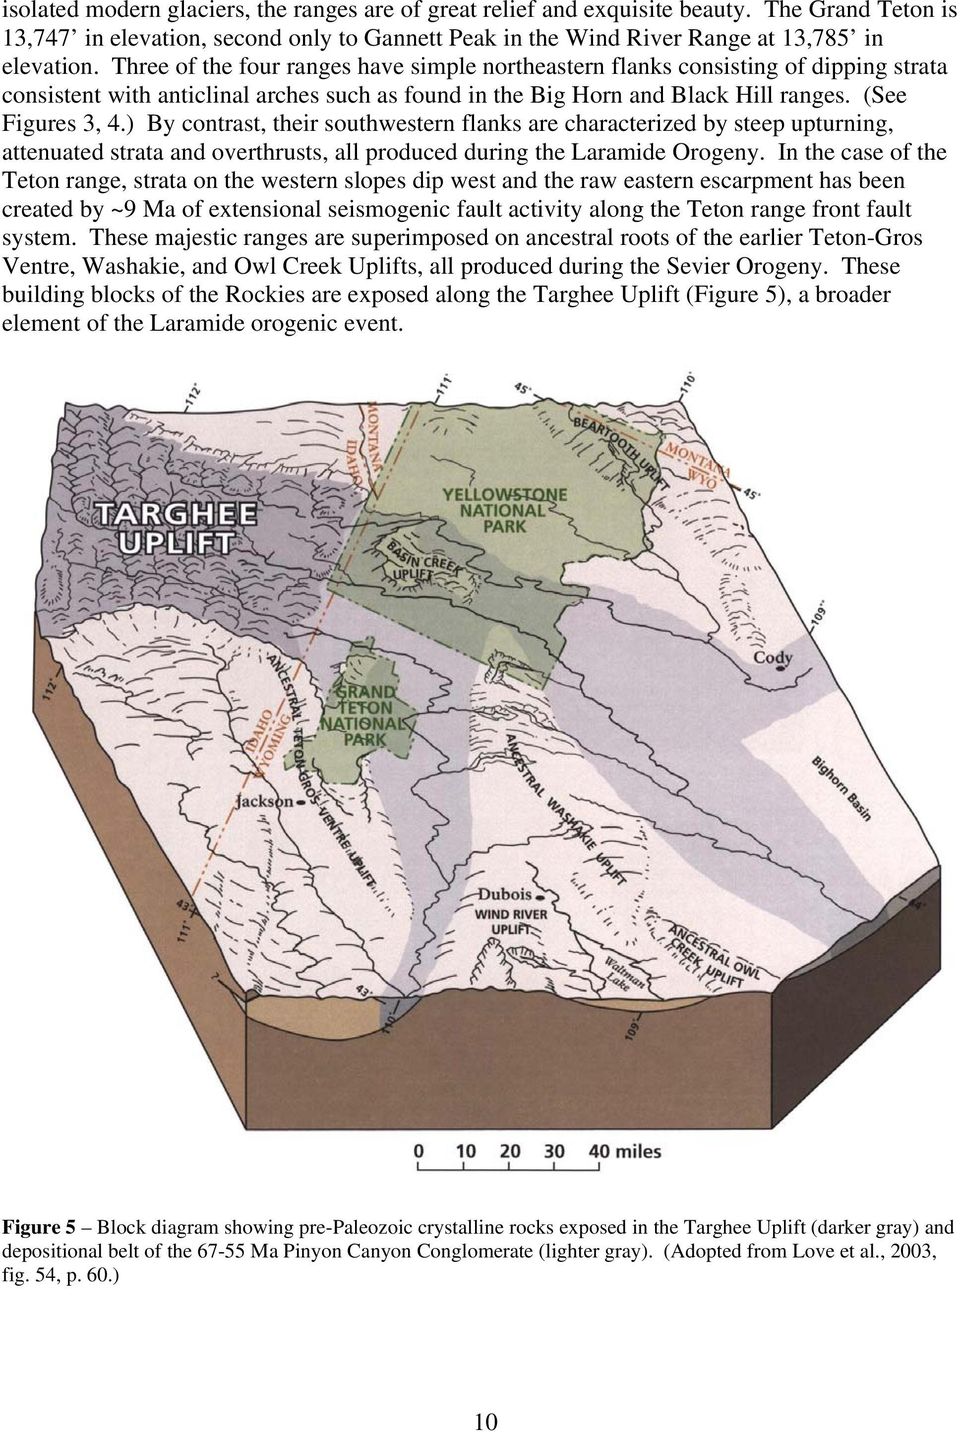 ) By contrast, their southwestern flanks are characterized by steep upturning, attenuated strata and overthrusts, all produced during the Laramide Orogeny.